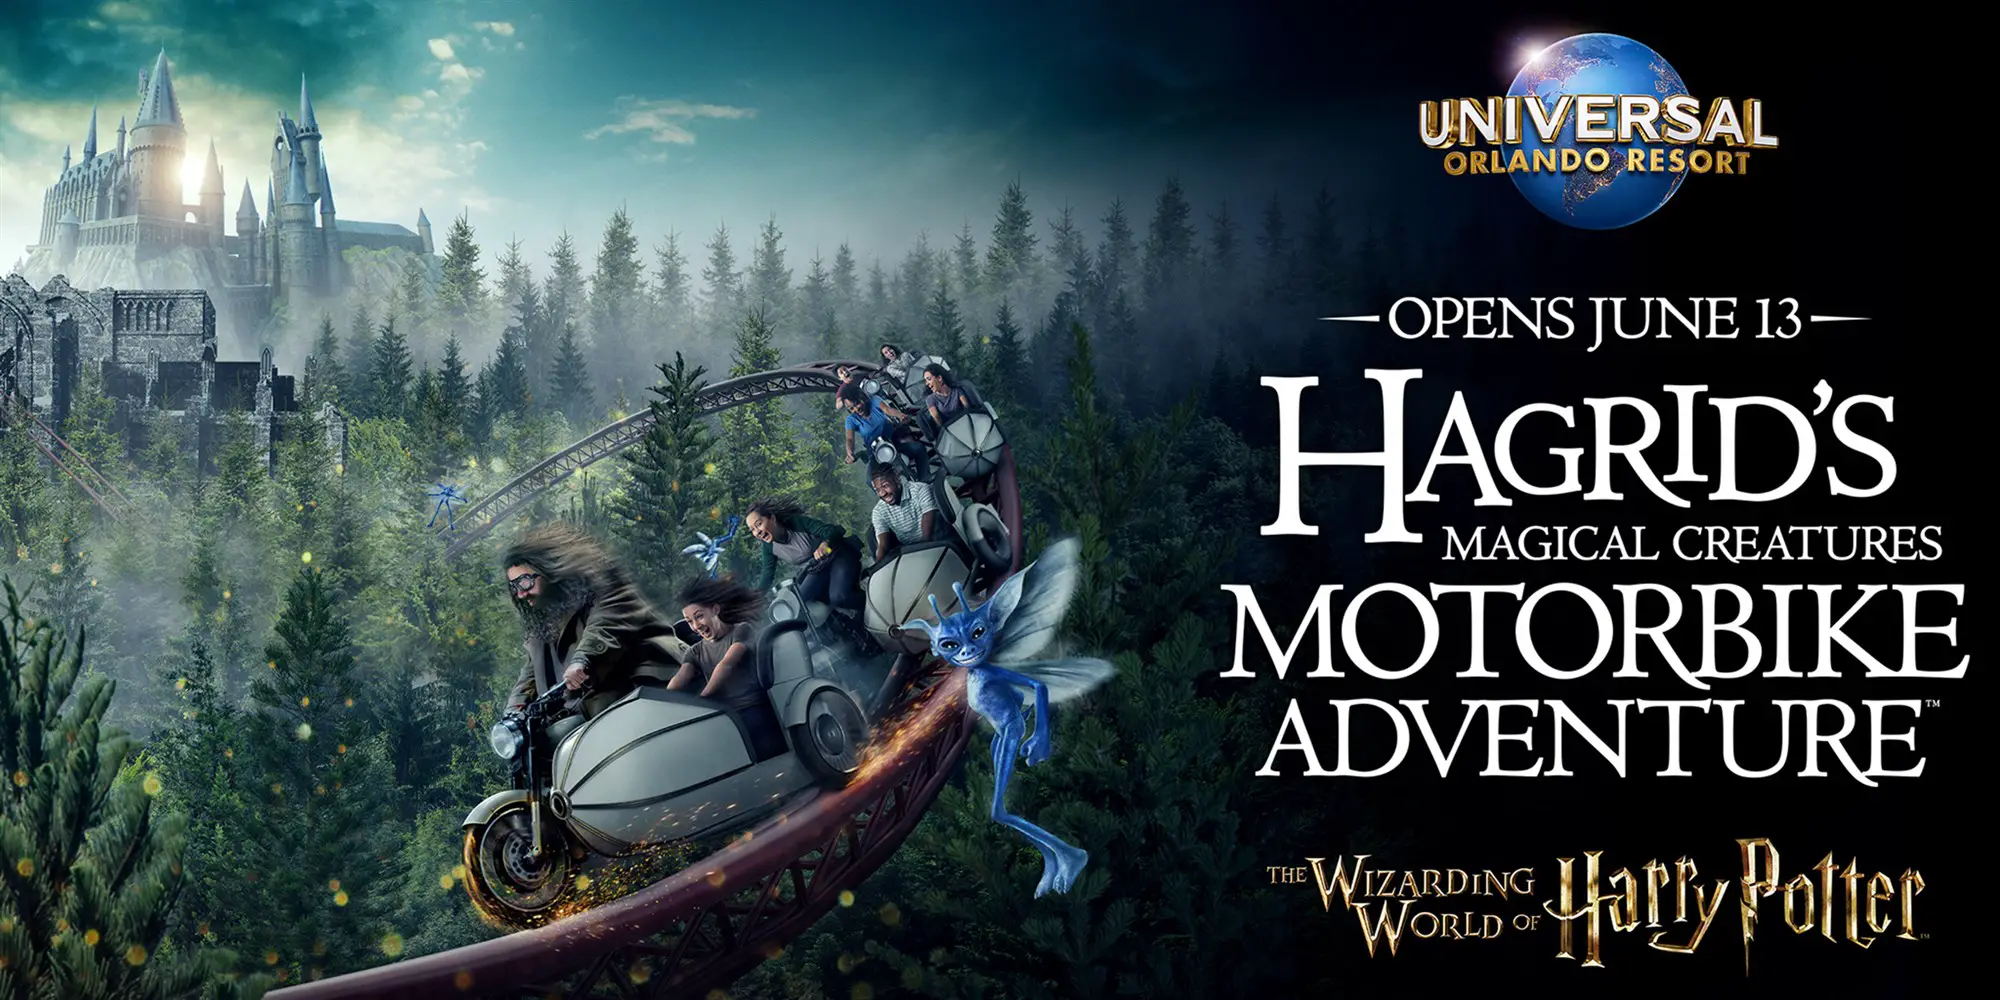 Harry Potter fans - here's your chance to win a trip to Universal Orlando Resort to attend the opening of Hagrid's Magical Creatures Motorbike Adventure at Universal Orlando Resort